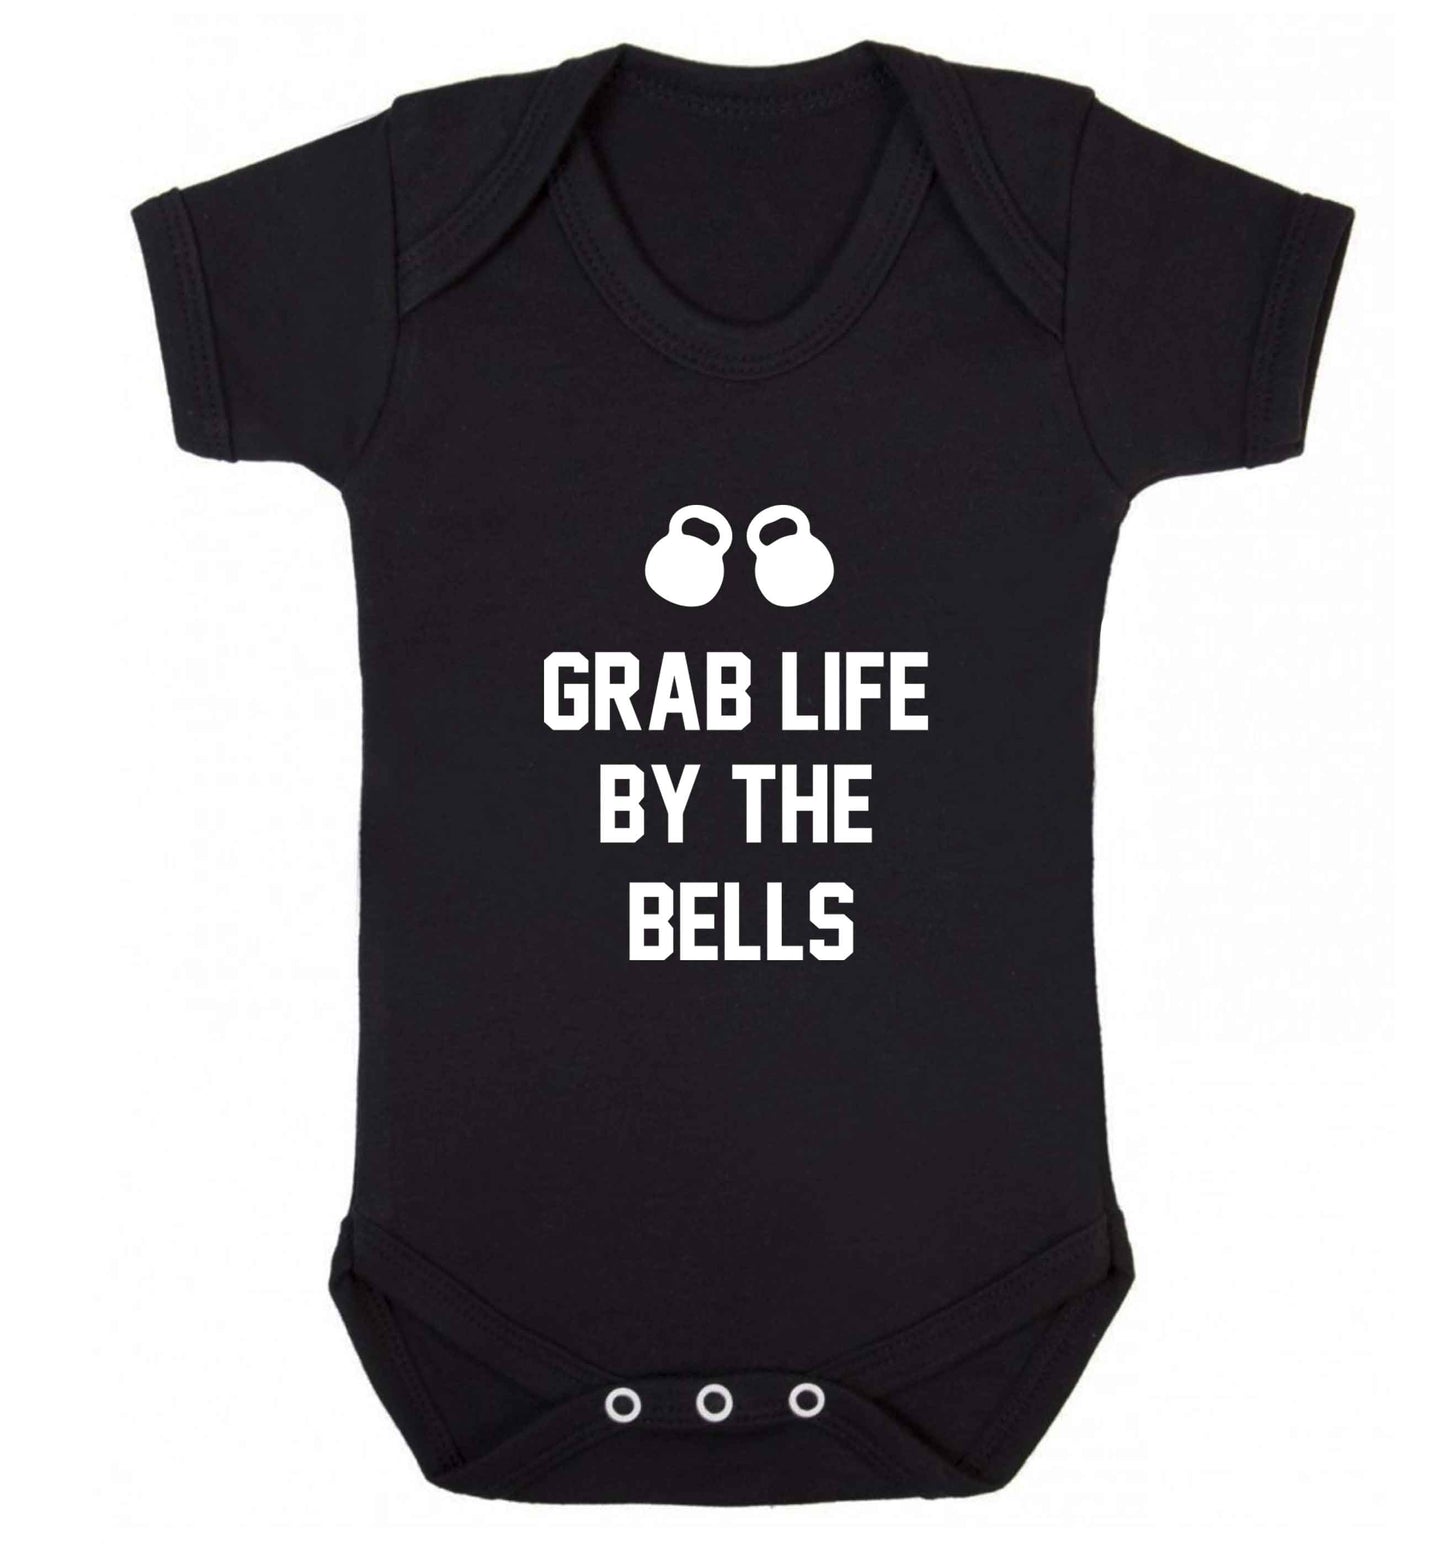 Grab life by the bells baby vest black 18-24 months